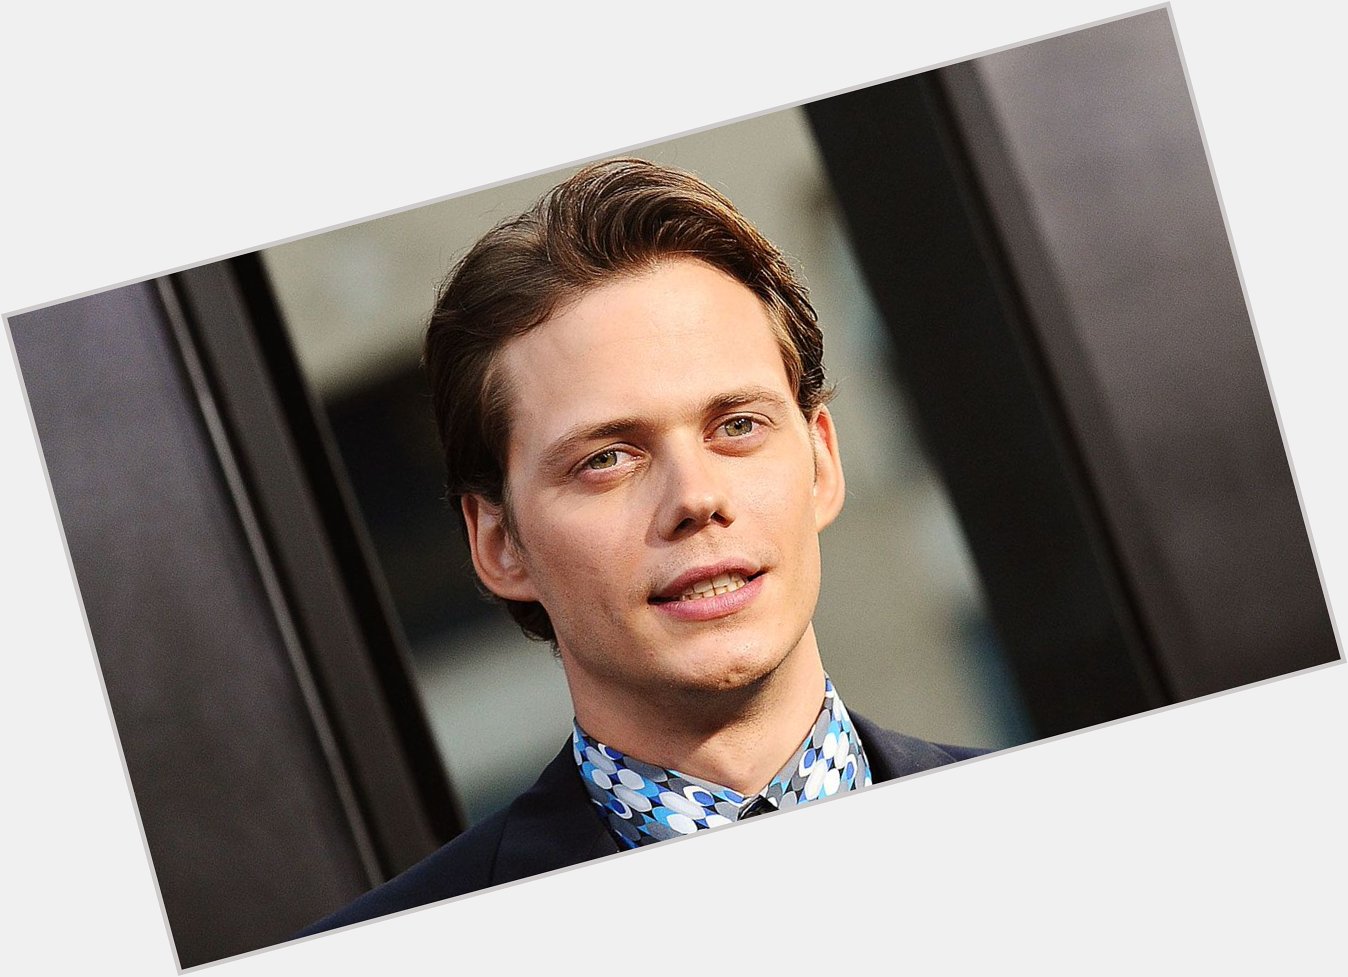 Happy Birthday to the one and only Bill Skarsgard!!! 